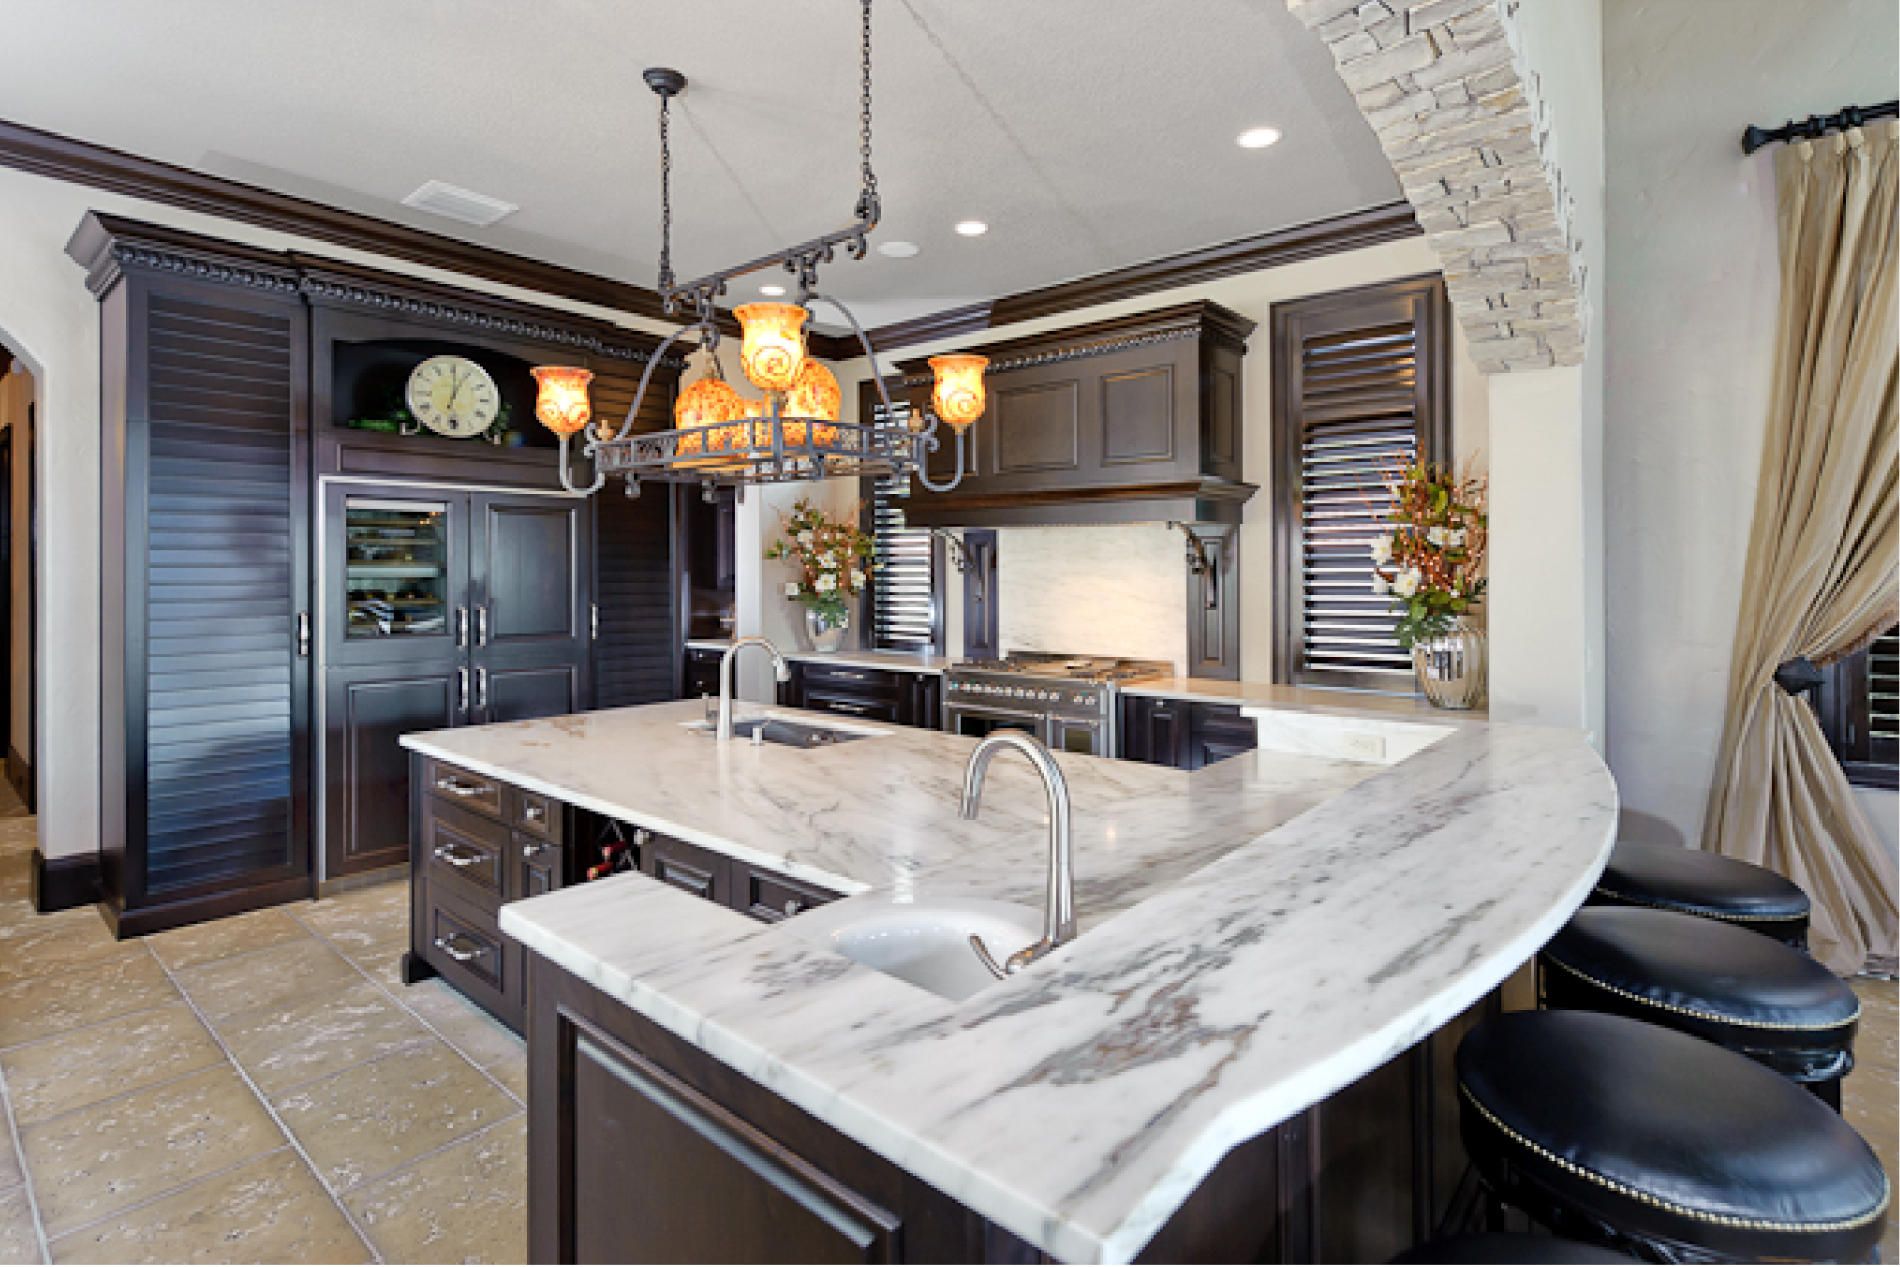 Kitchen Island Lighting System With Pendant And Chandelier Within Kitchen Island Light Chandeliers (View 4 of 15)